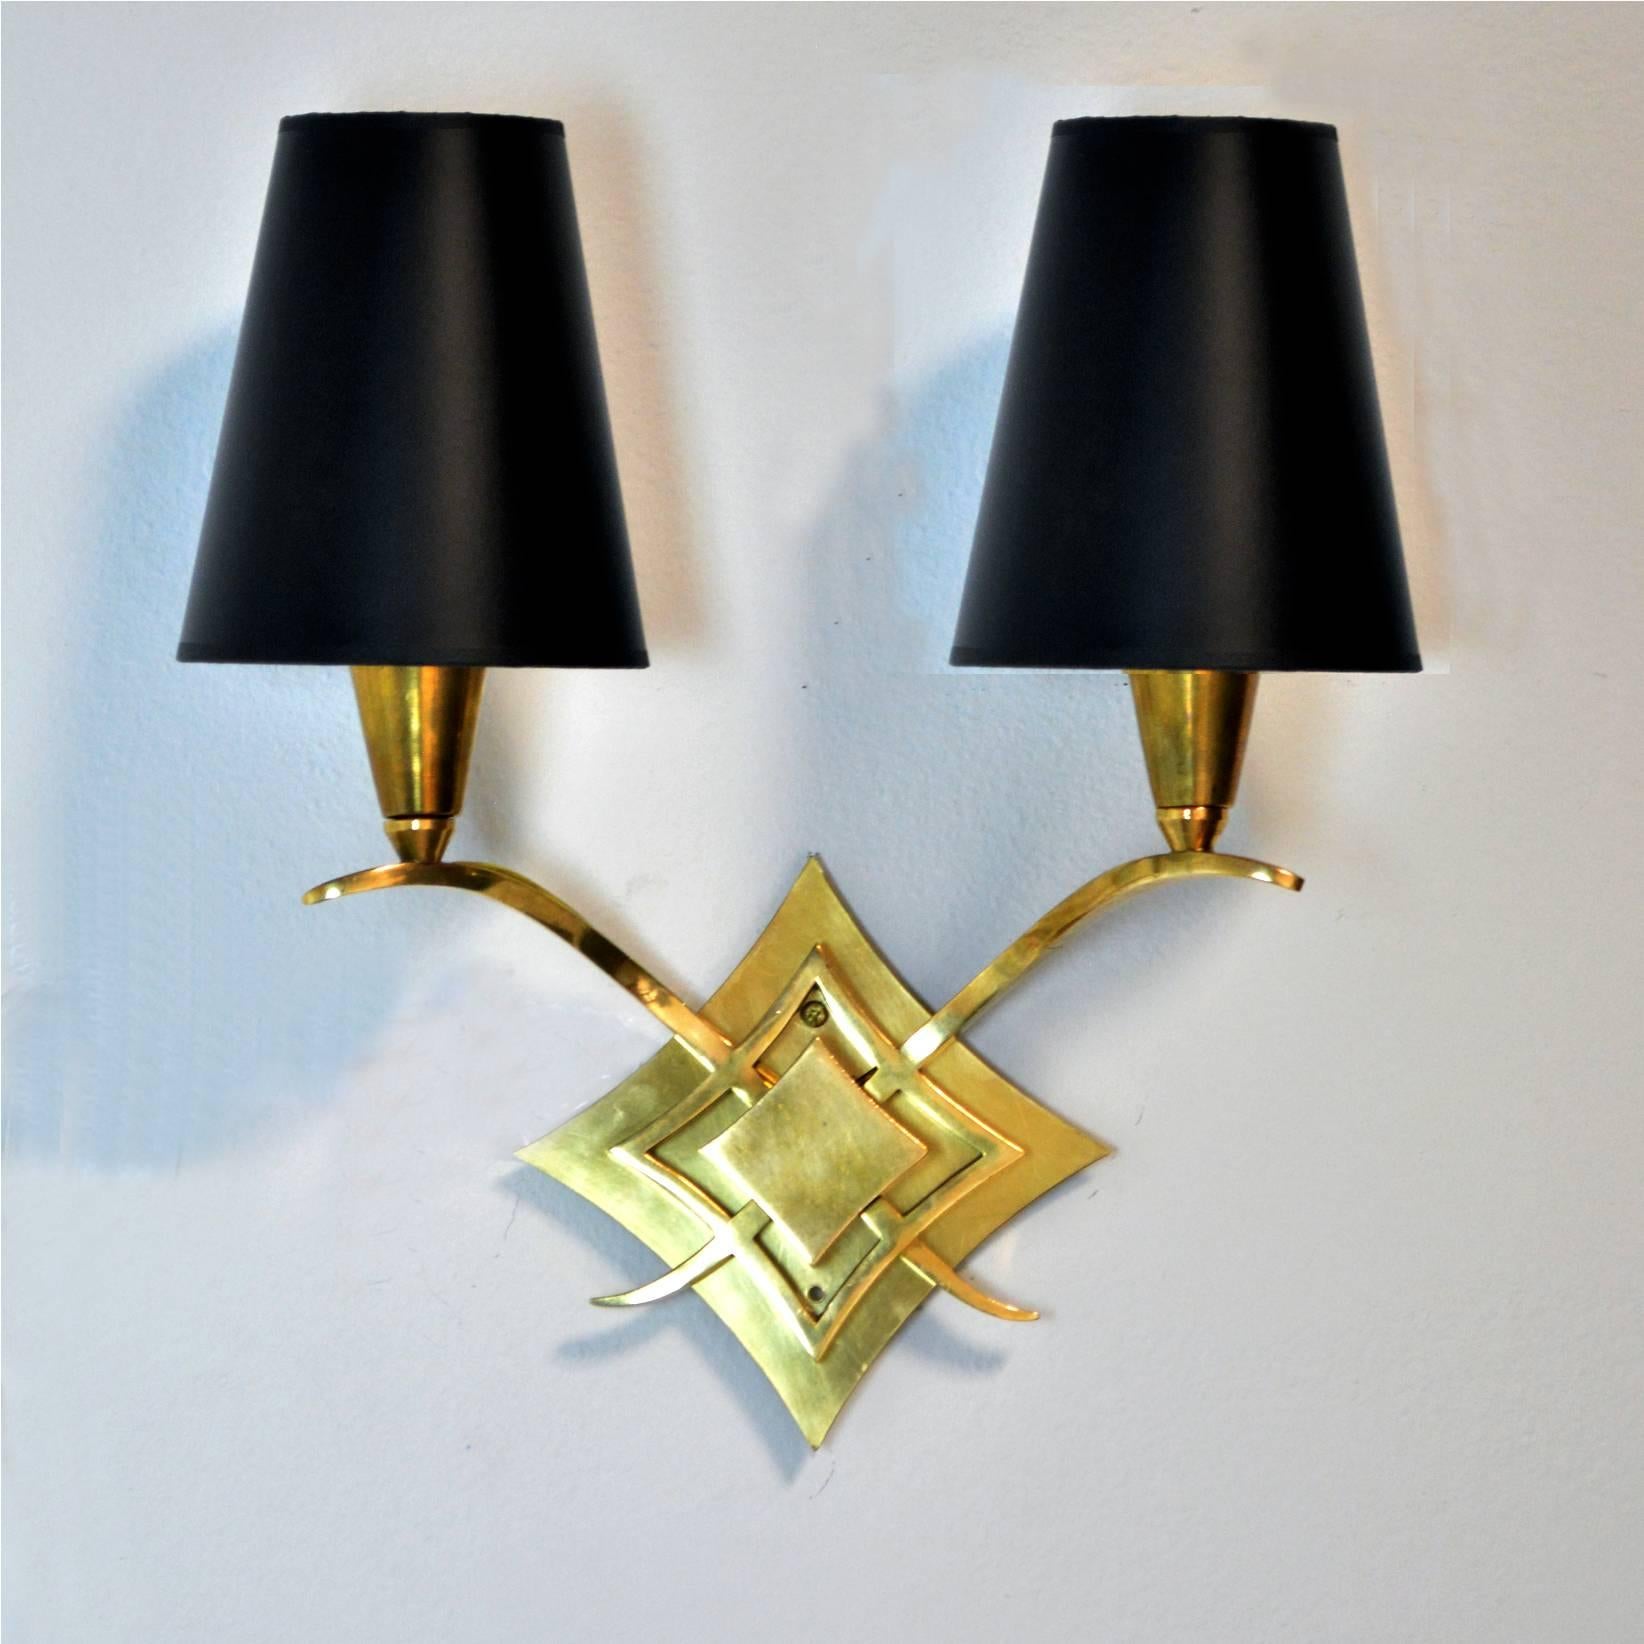 A set of four Mid-Century Modern French sconces, attributed to Jules Leleu but not marked. Each sconce has been rewired and takes a US candelabra base bulb. New, solid brass, shaped backplate for US installation, can be removed or painted if